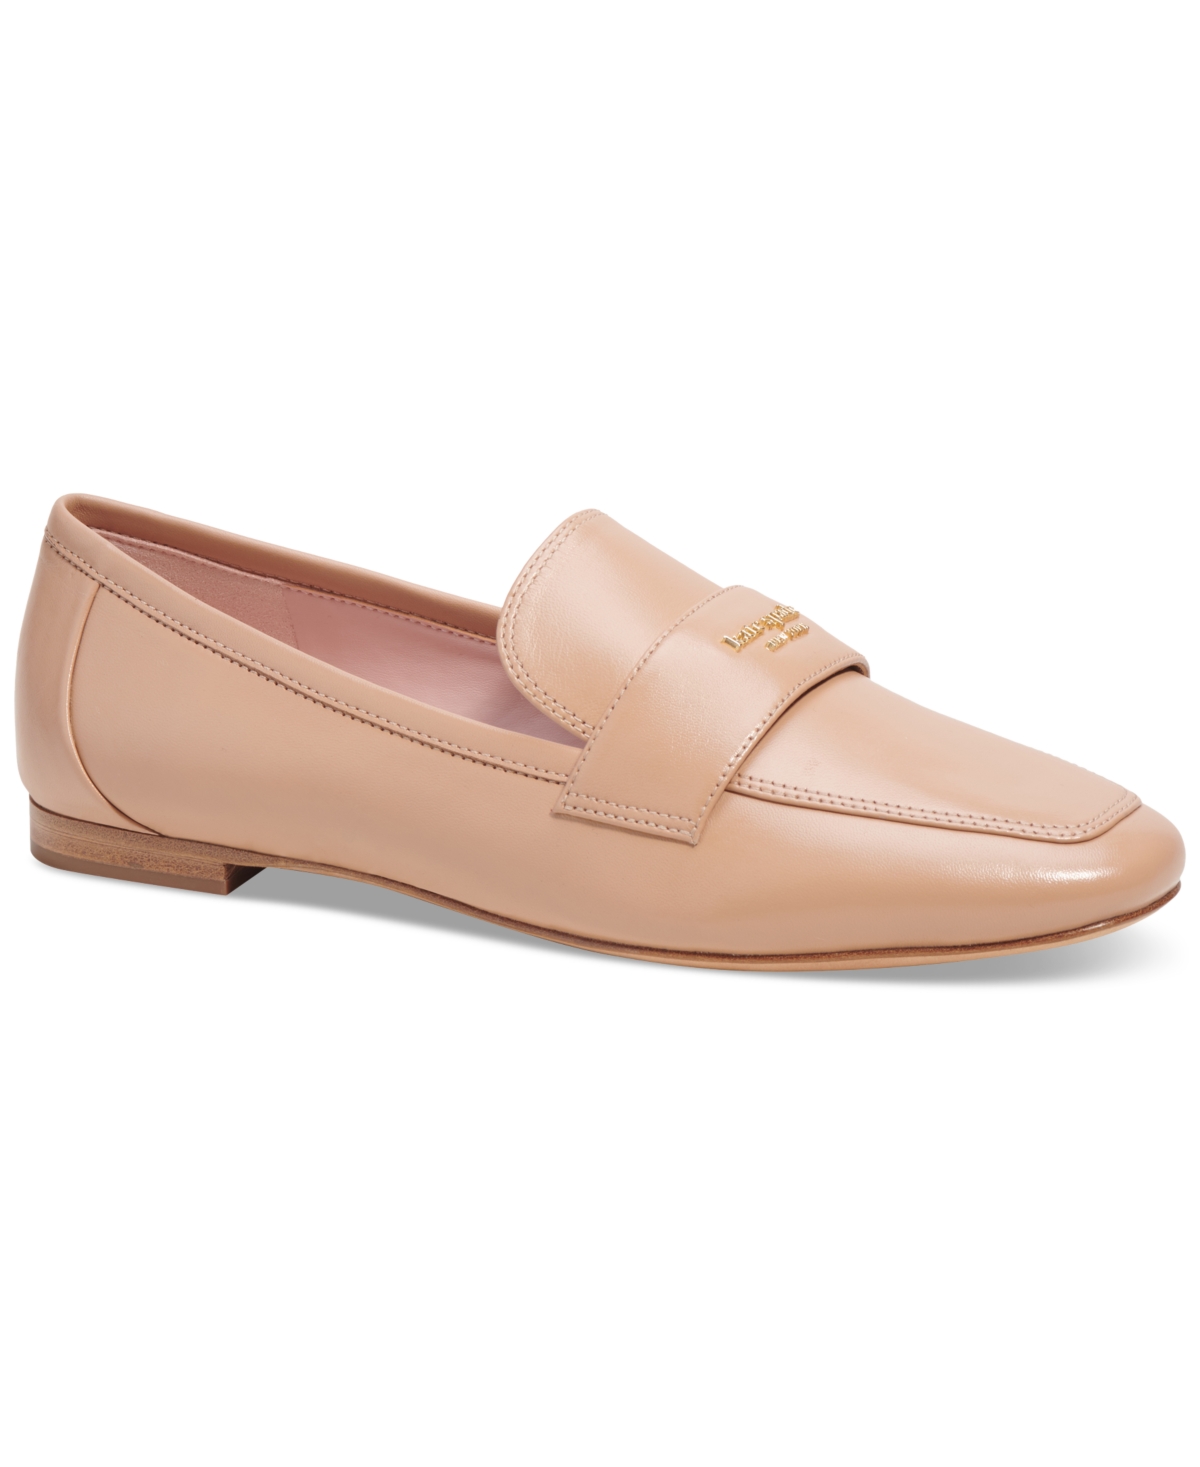 Kate Spade Women's Leighton Slip-on Loafer Flats, Created For Macy's In Light Fawn